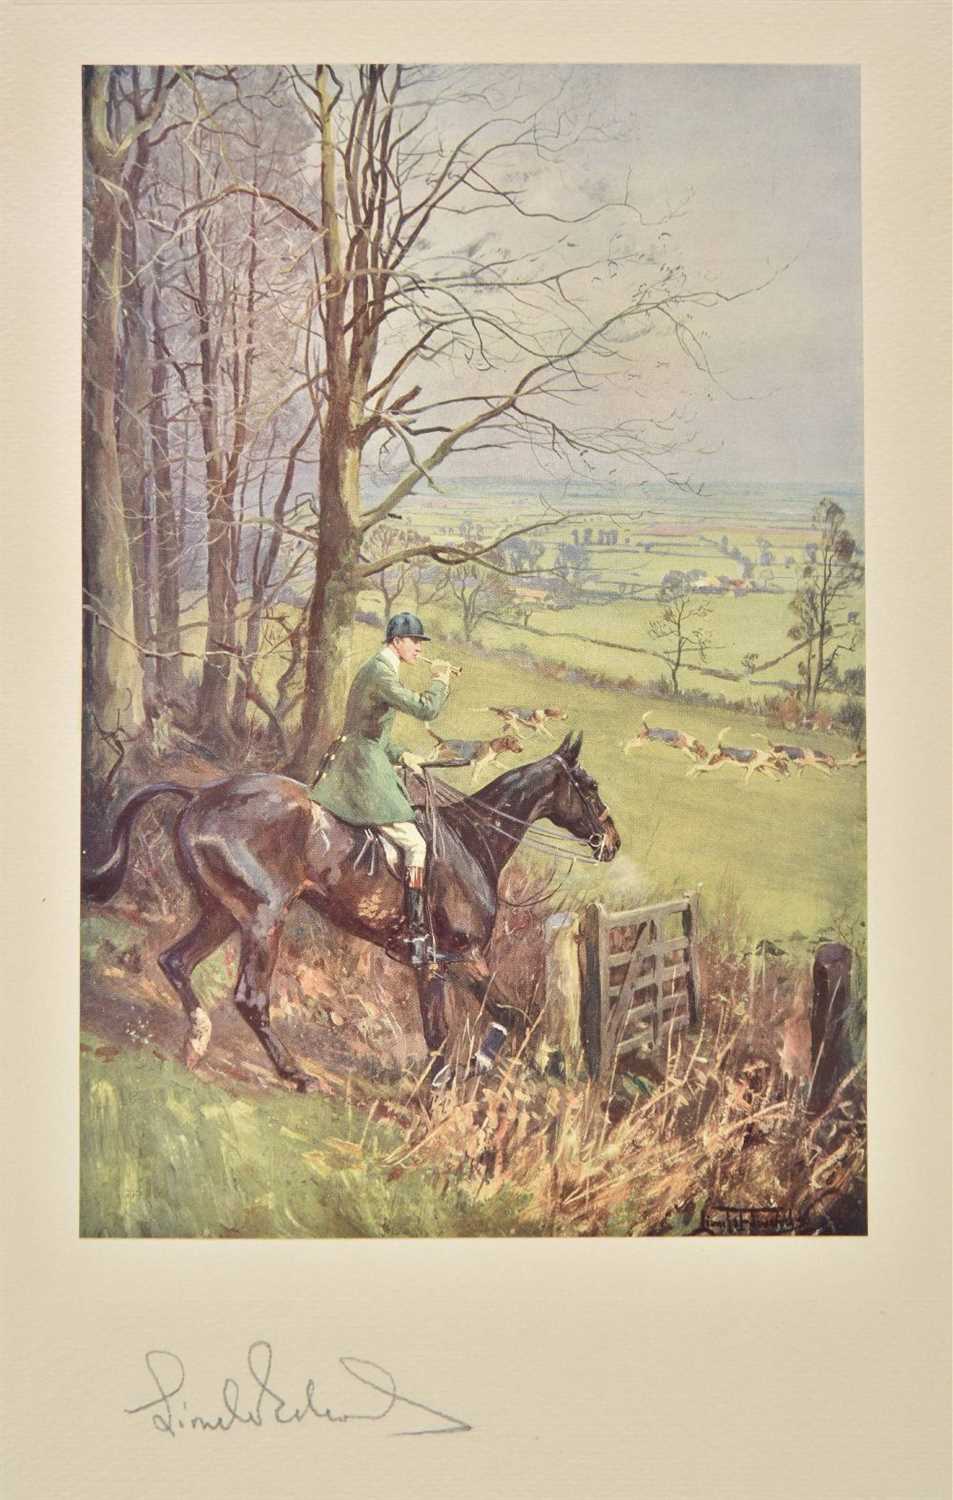 Lot 122 - Edwards (Lionel). A Sportsman's Bag, 1st Edition, Country Life, [1926]